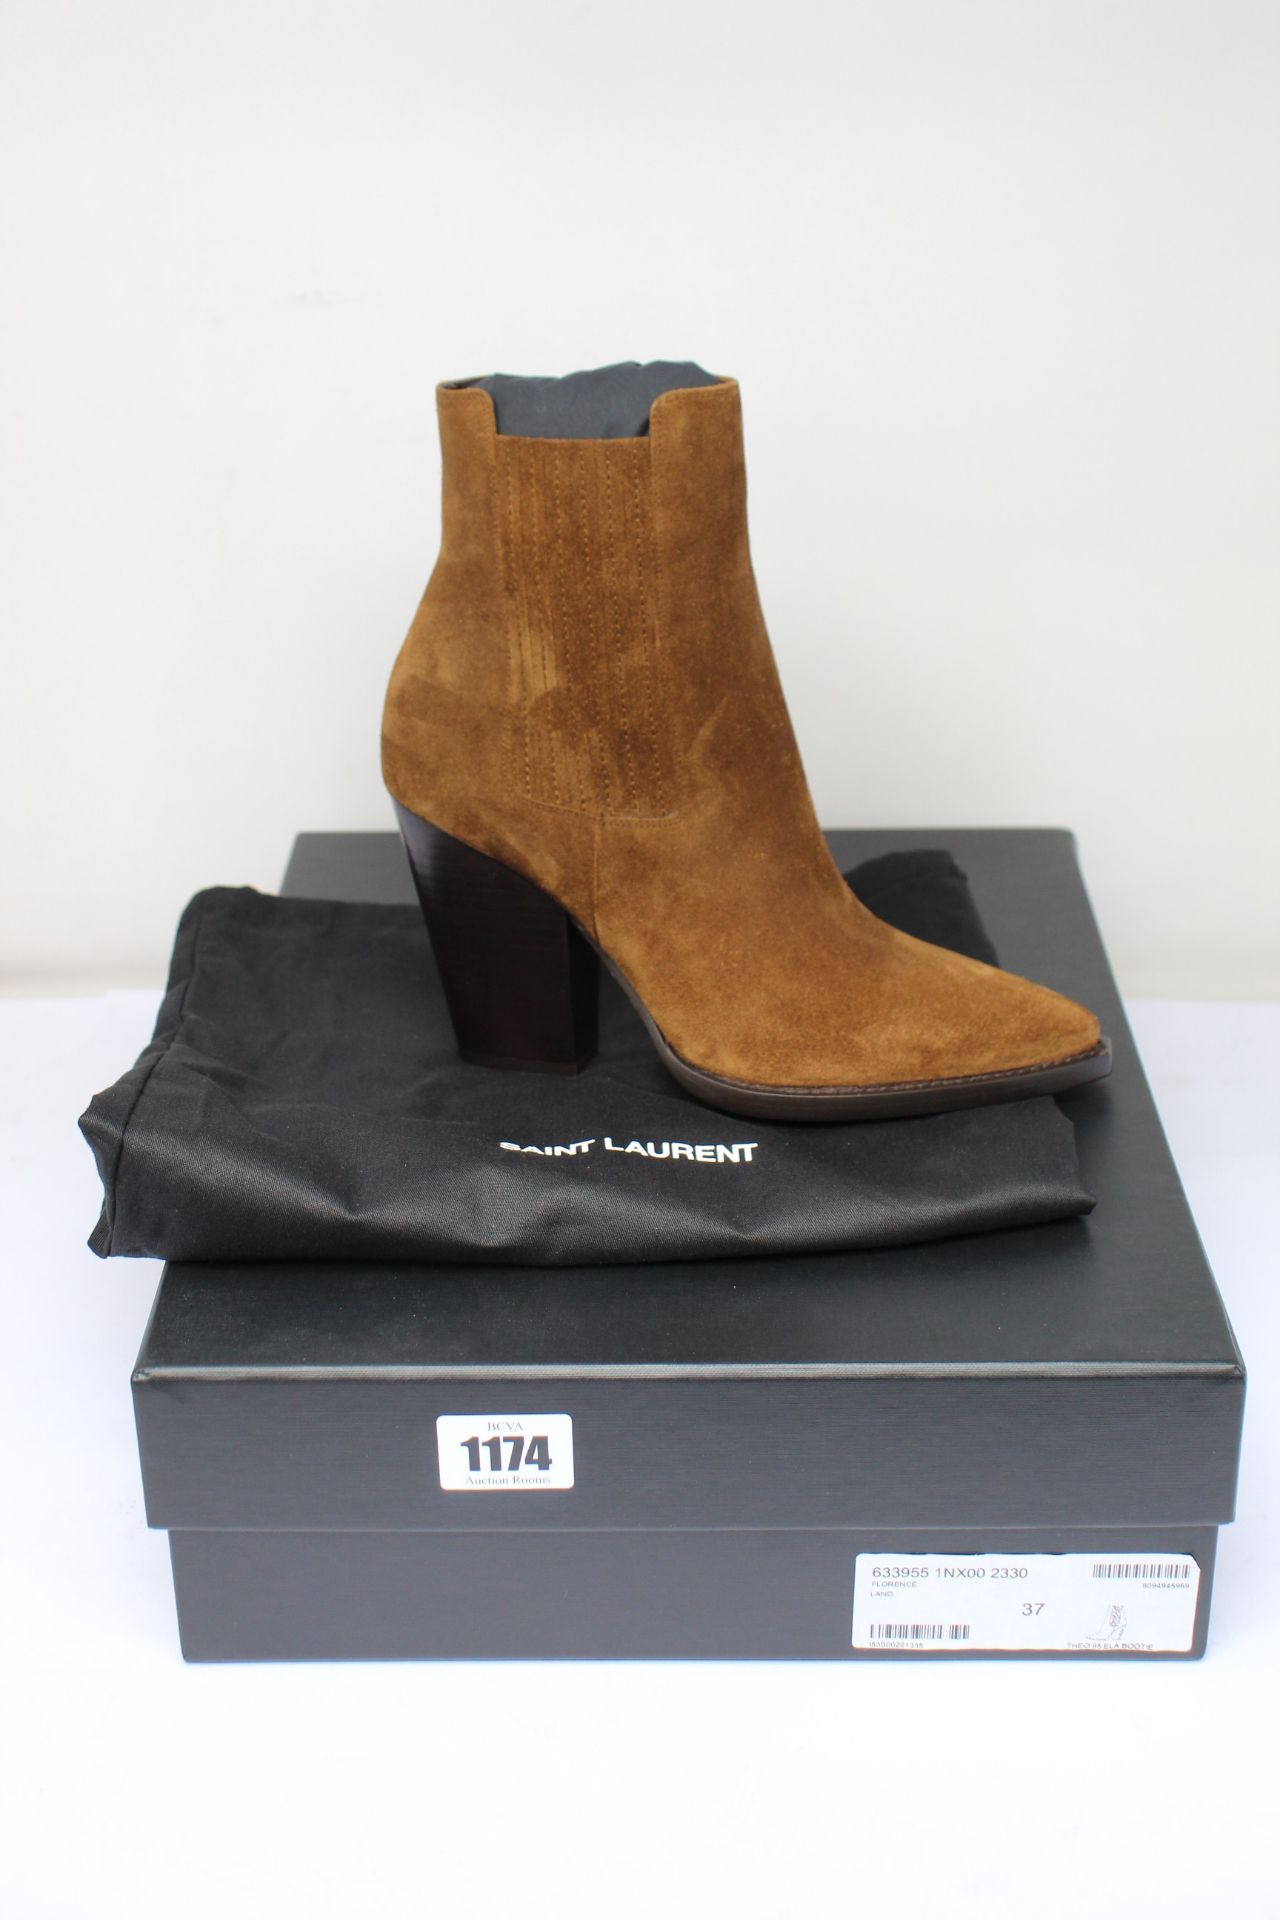 A pair of lady's boxed as new Saint Laurent Theo Chelsea Boots in brown suede (EU 37).